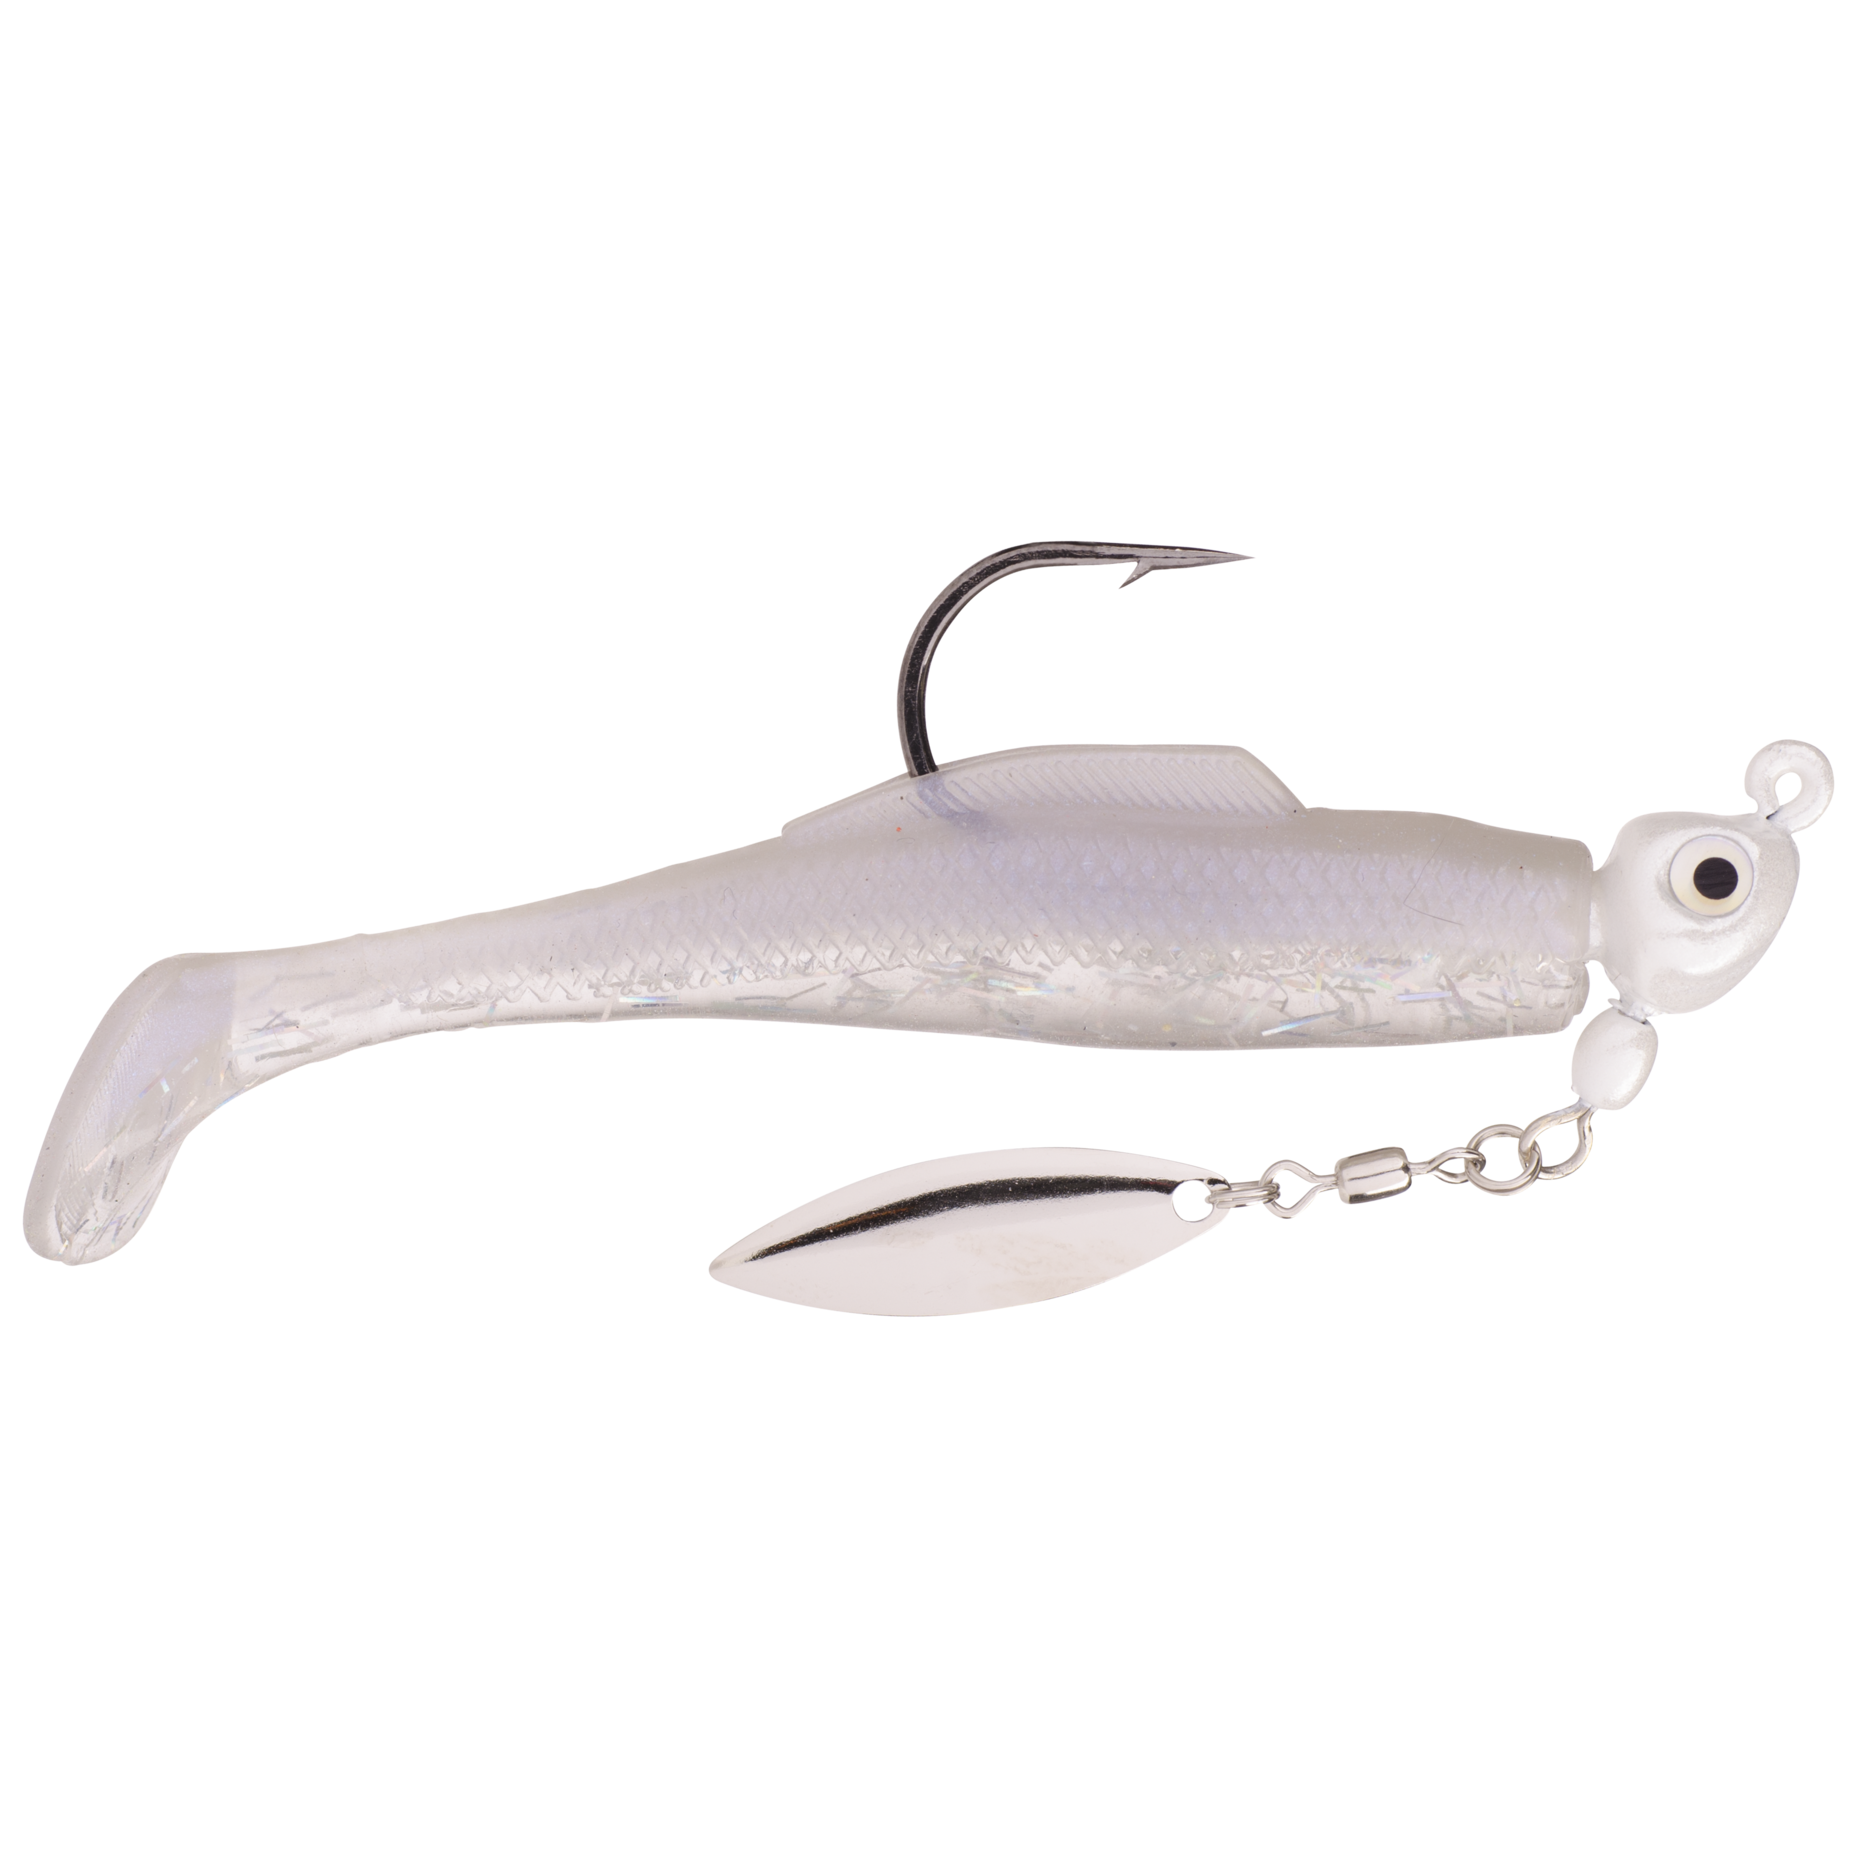 Speckled Trout Magic Jig Head 1/4oz